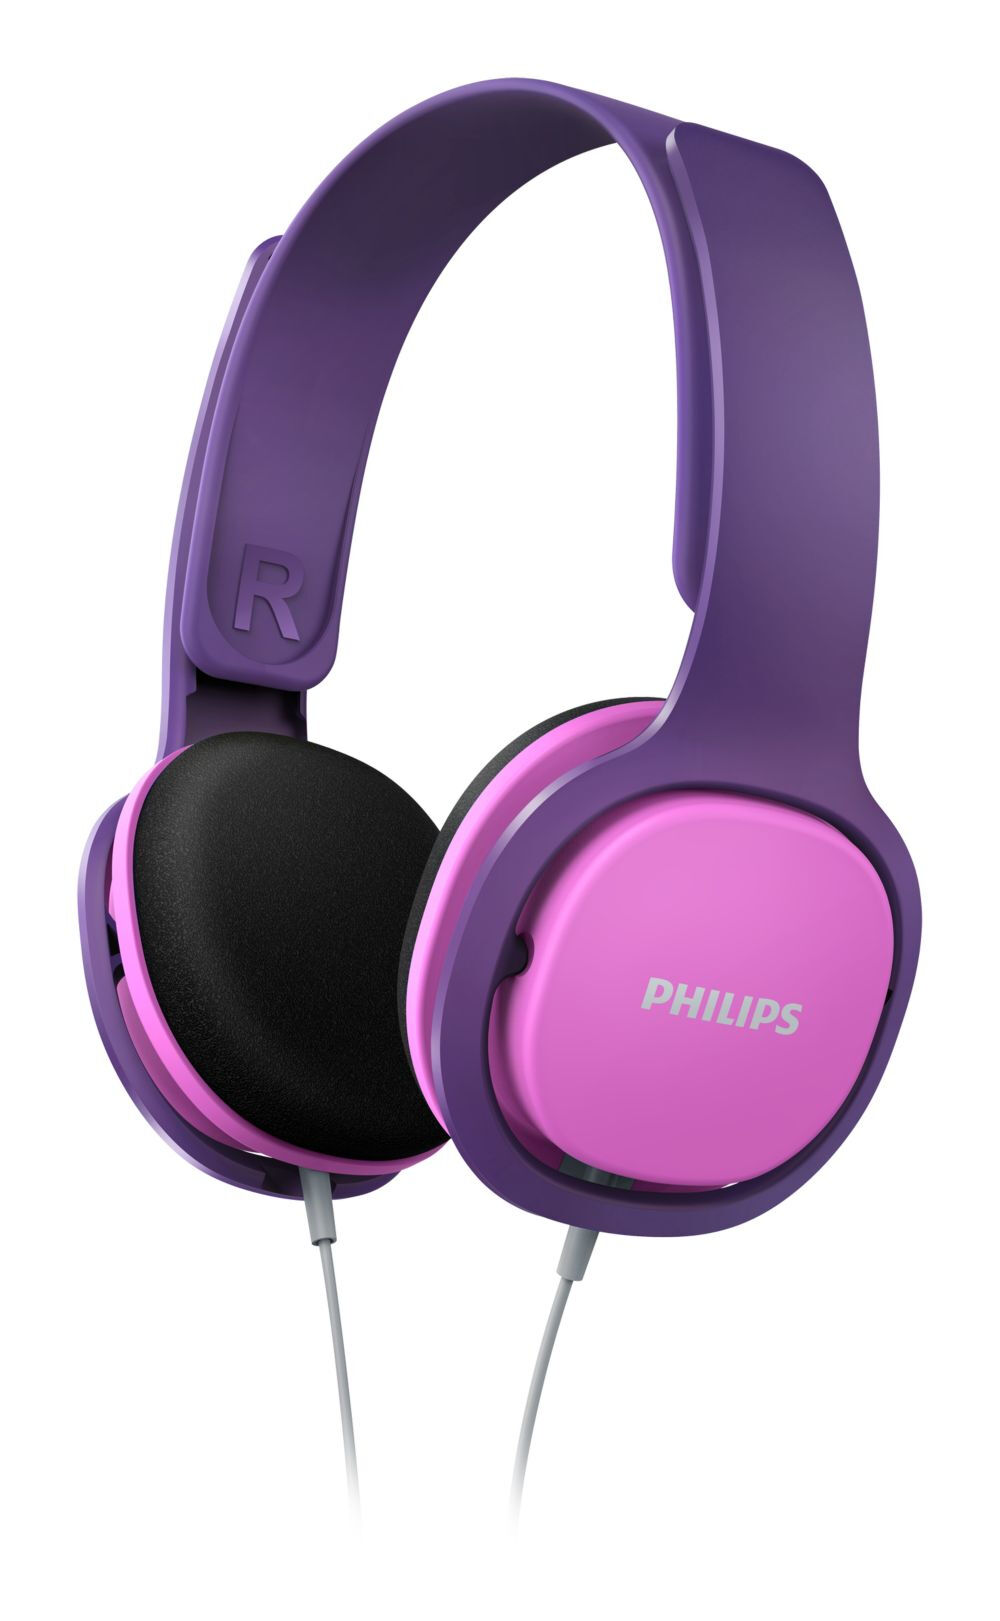 Philips SHK2000 - Roze/Paars